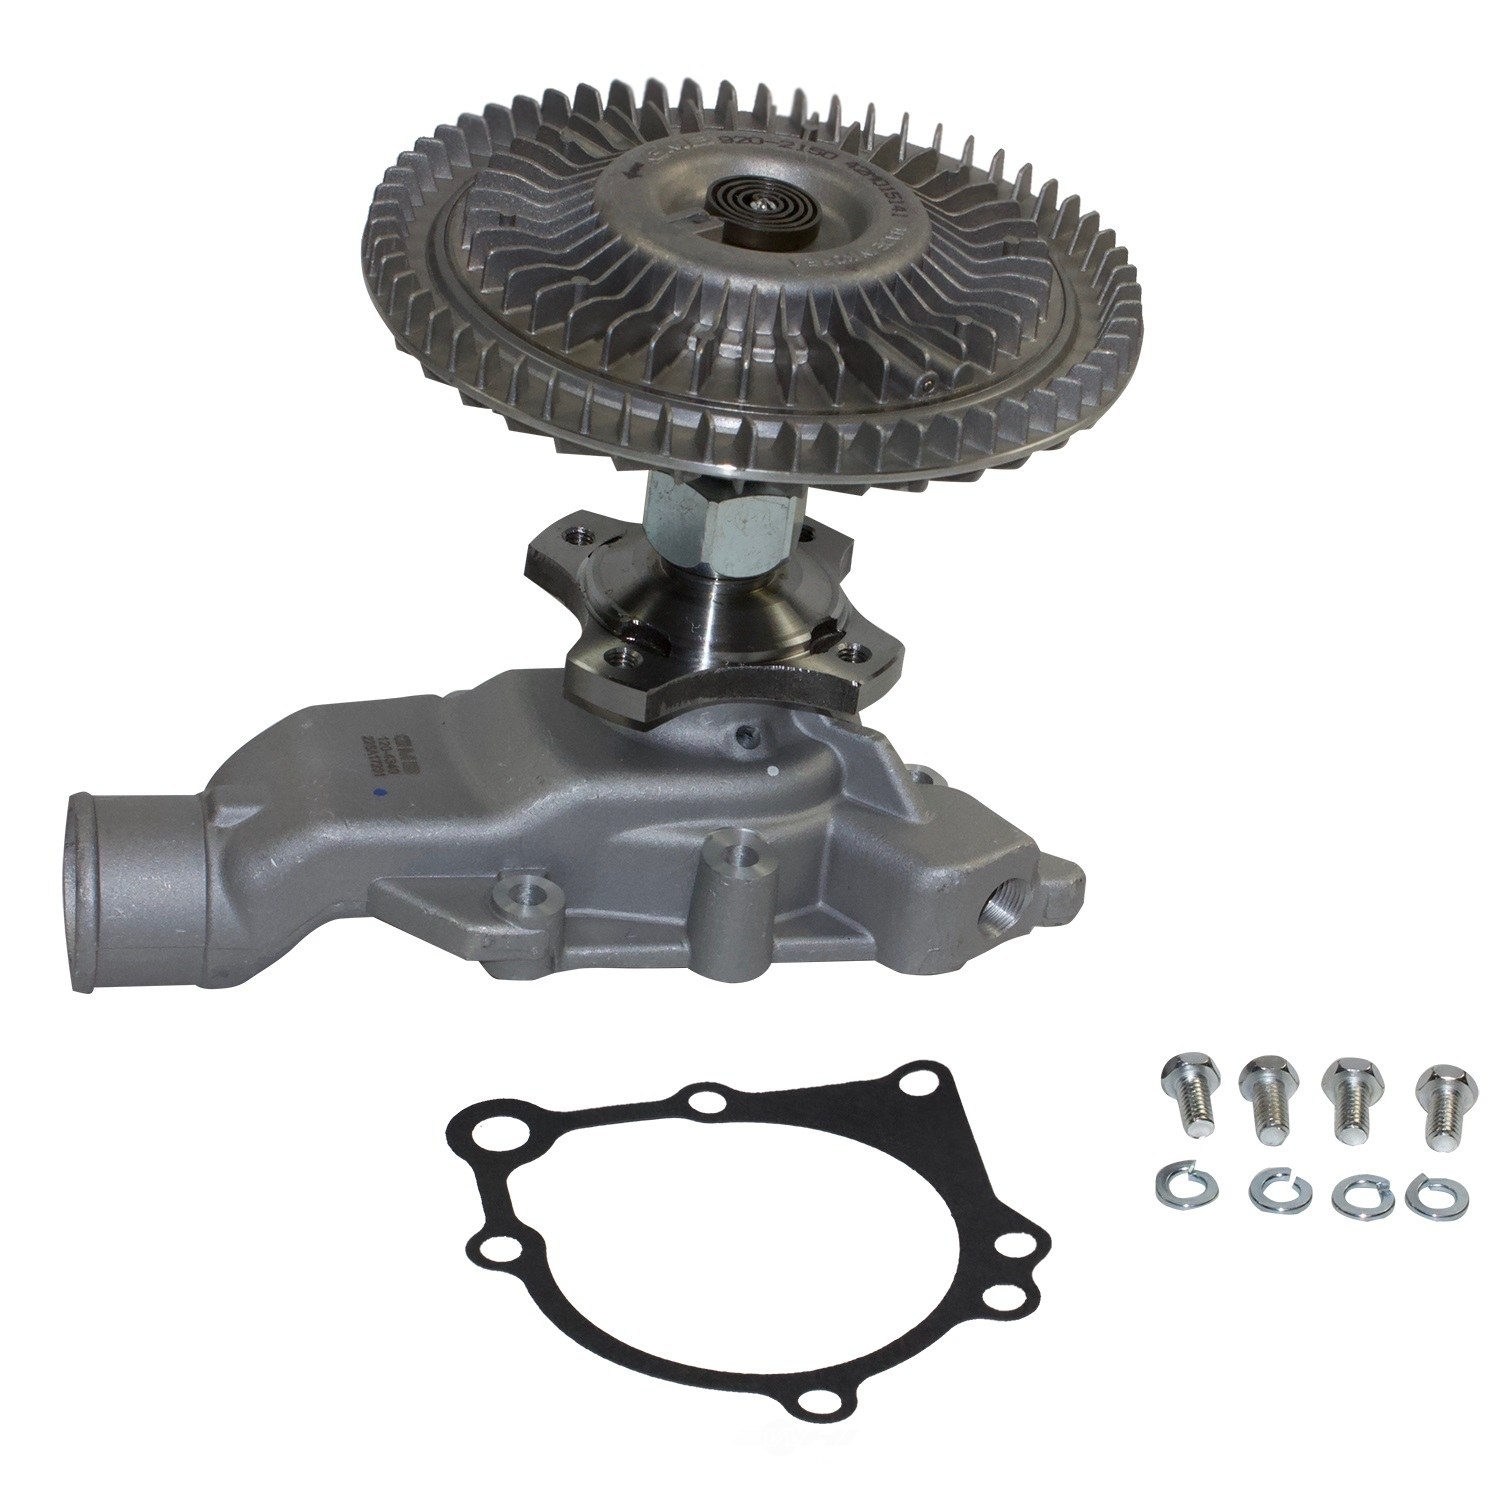 2005 Jeep Wrangler Engine Water Pump with Fan Clutch - GMB 120-0019